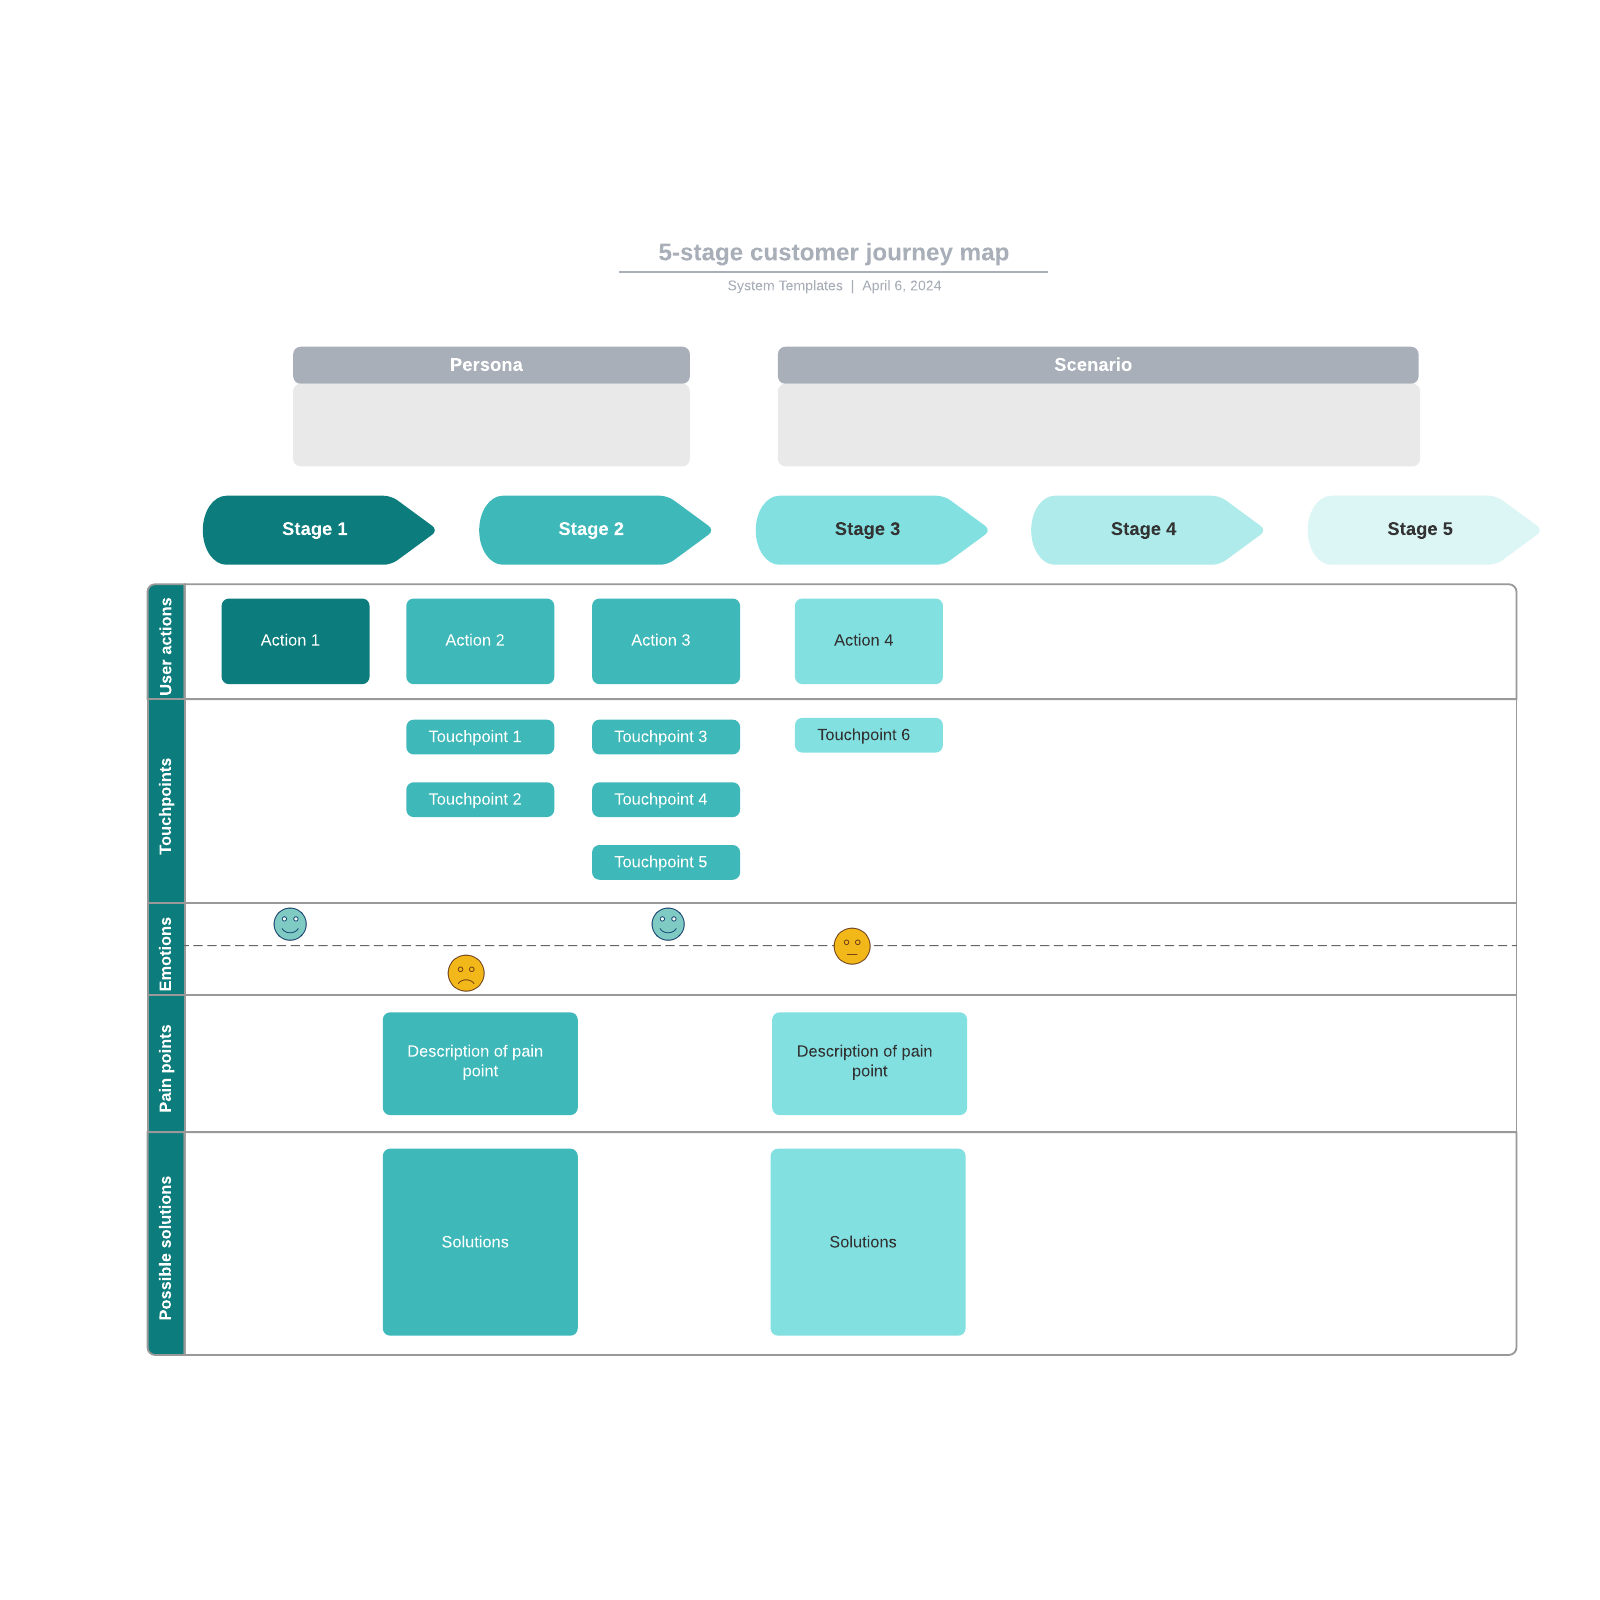 5-stage customer journey map example